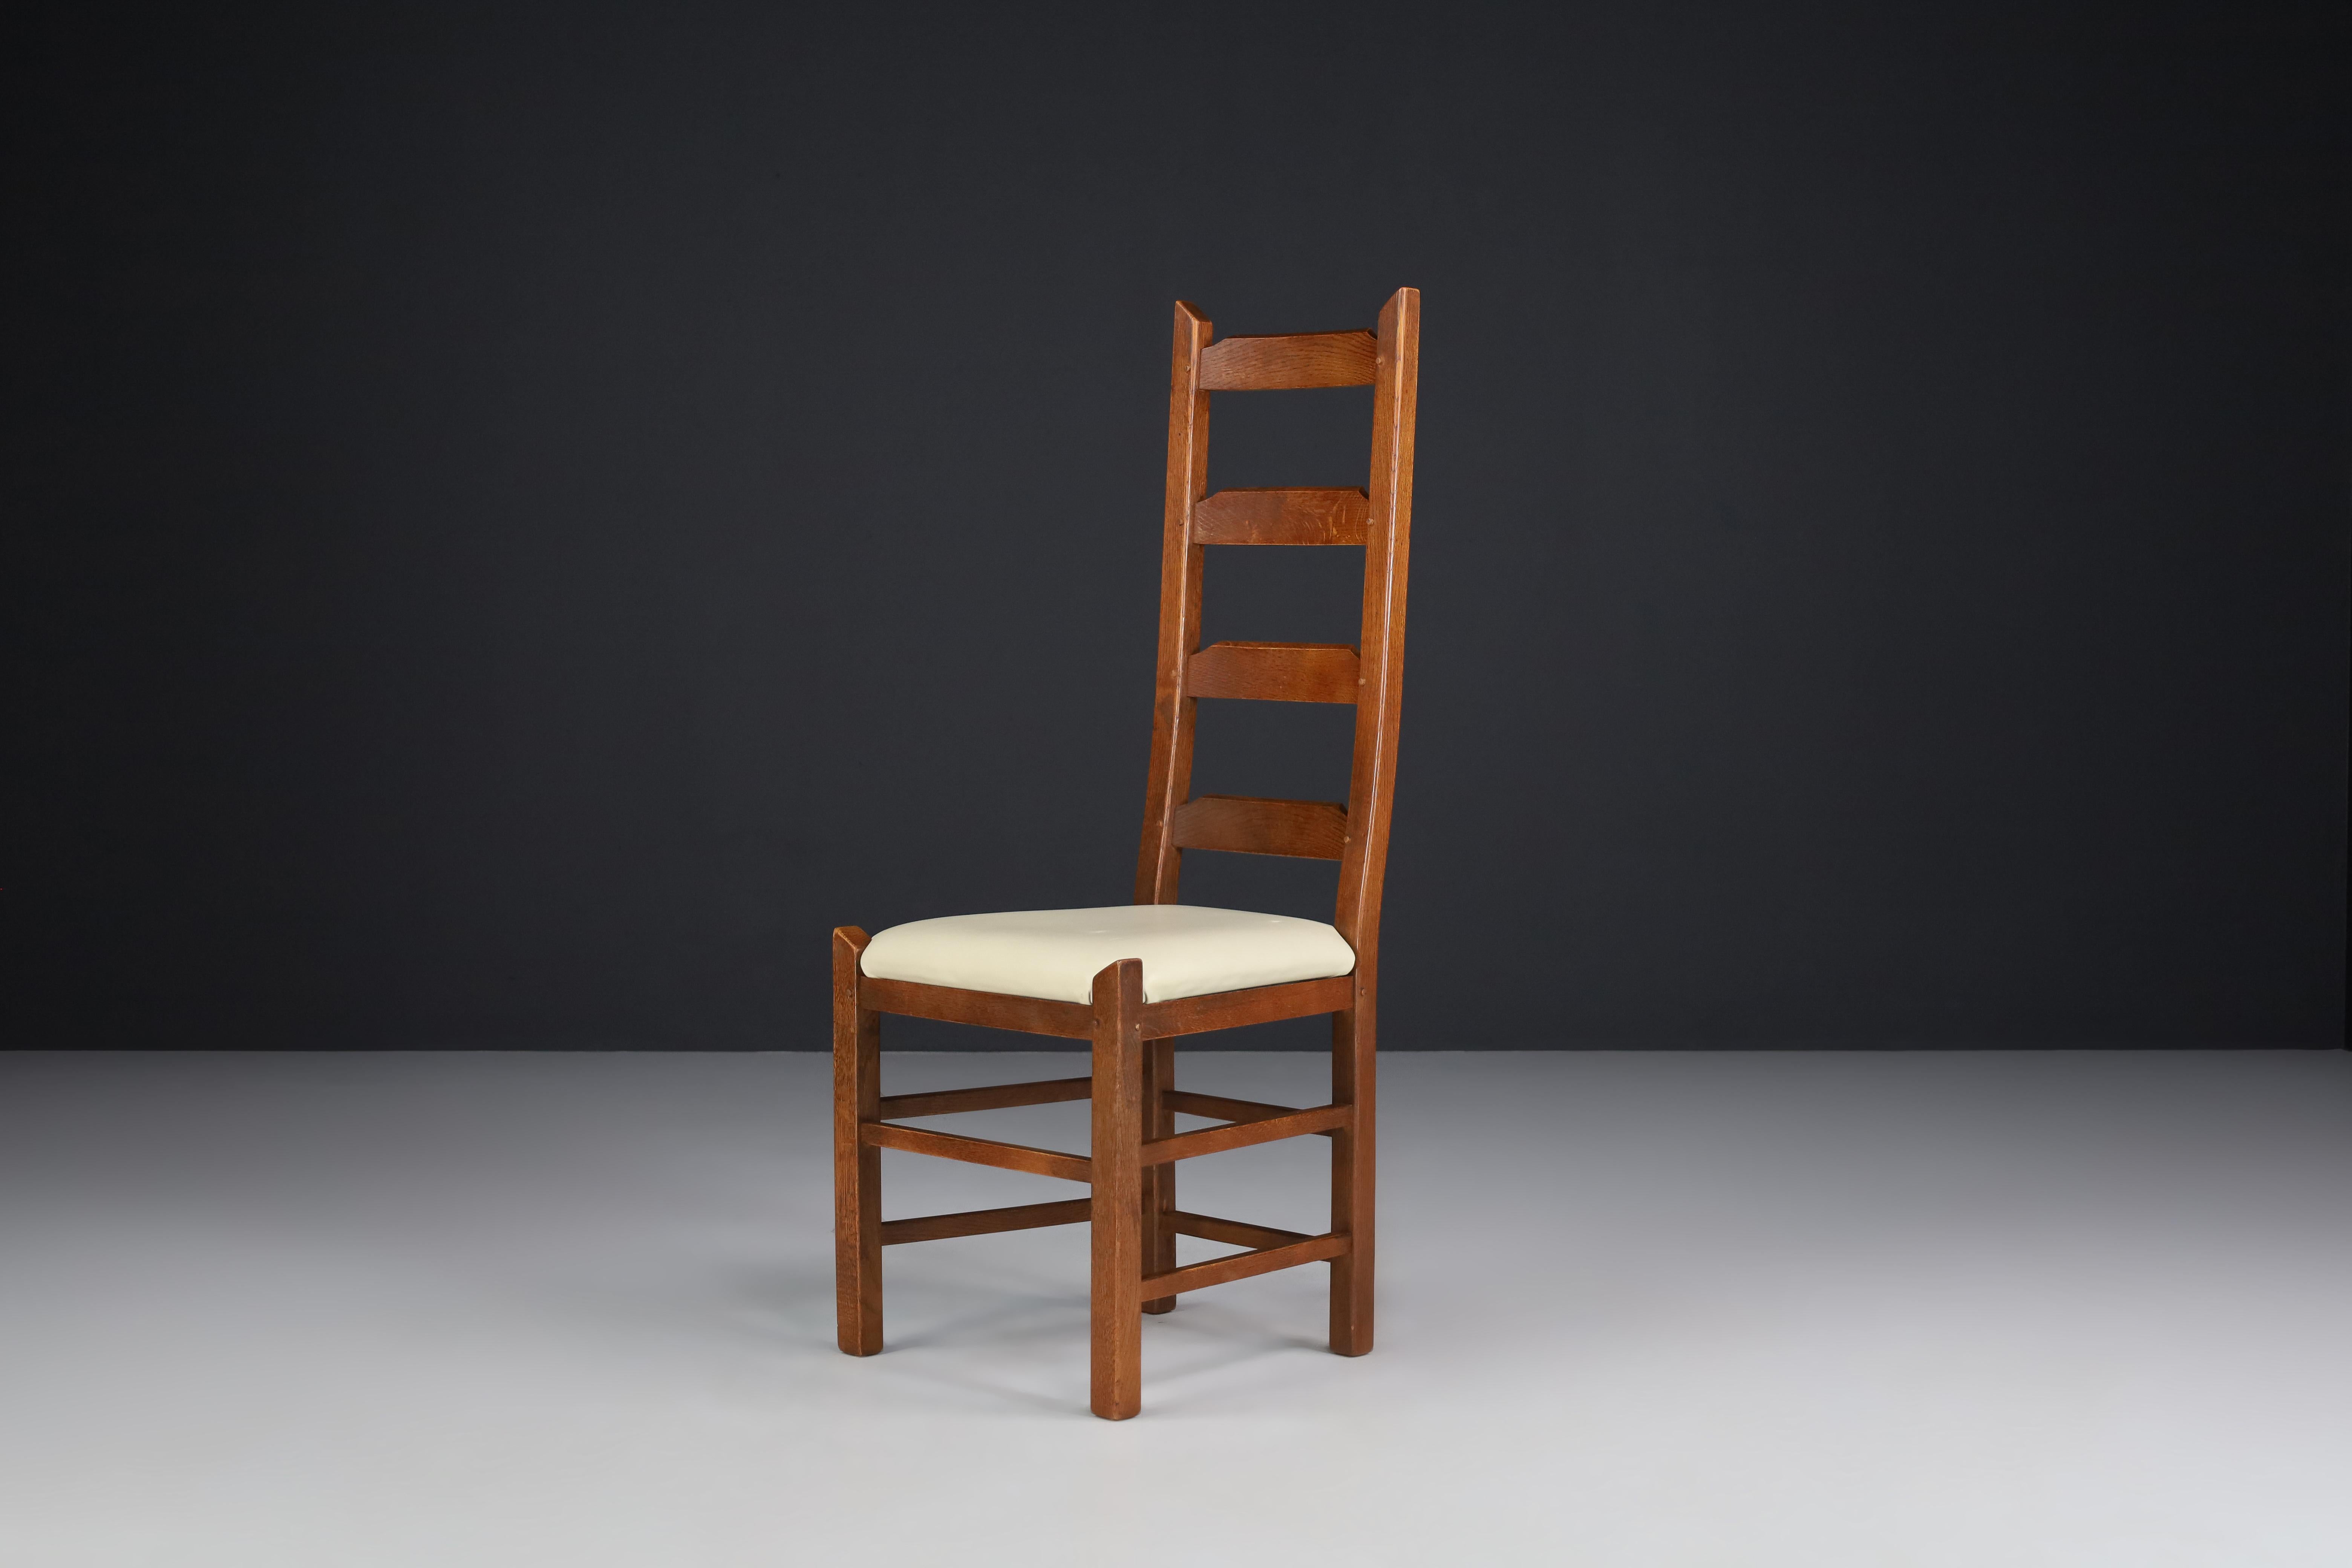 Brutalist Ladder Back Chairs Crafted in Oak and Leather Seats, France, 1950s For Sale